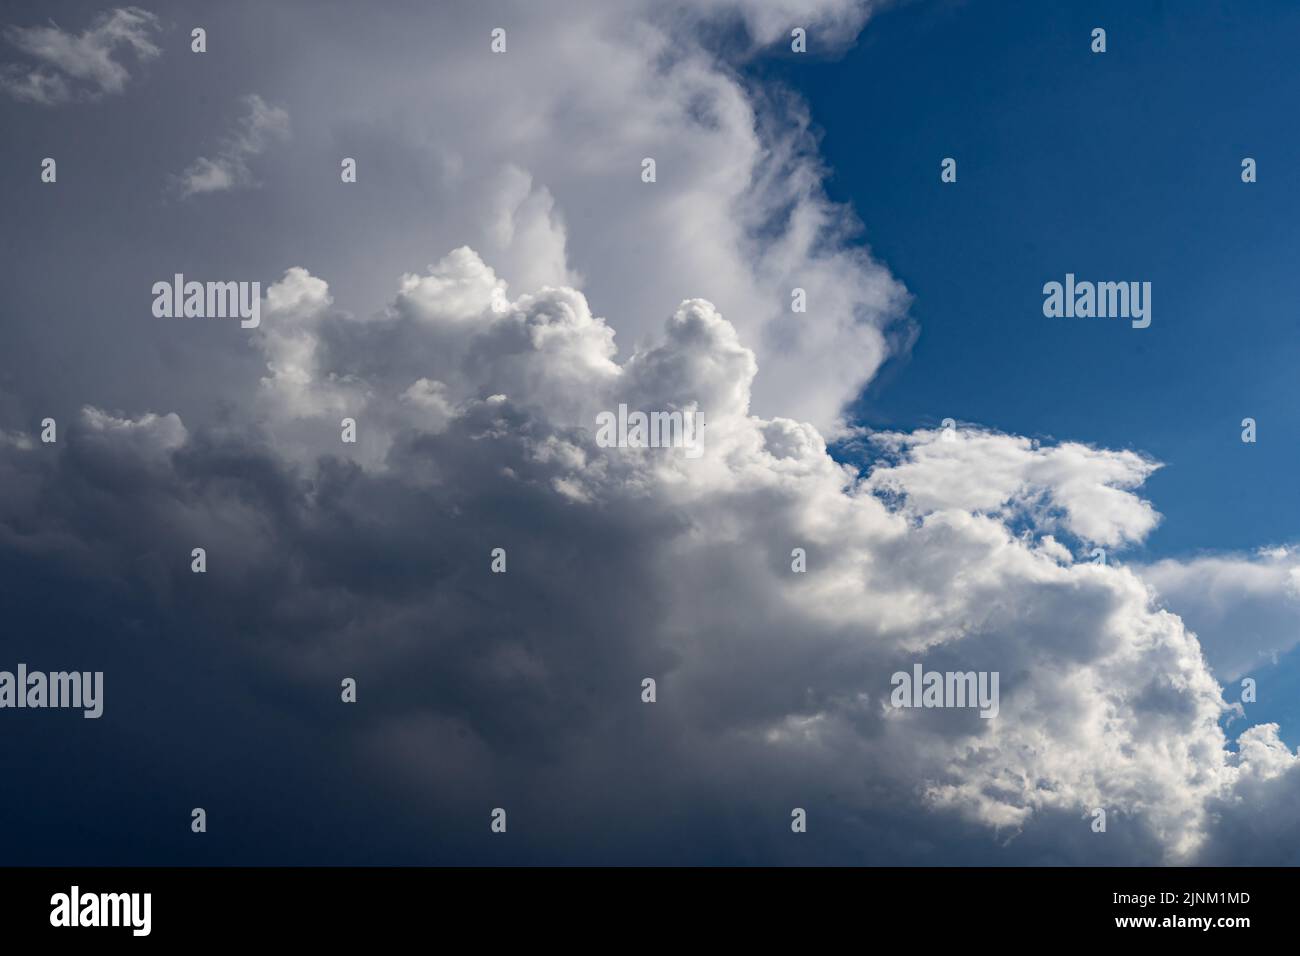 Thunderstorm clouds towering in a bright blue summer sky Stock Photo